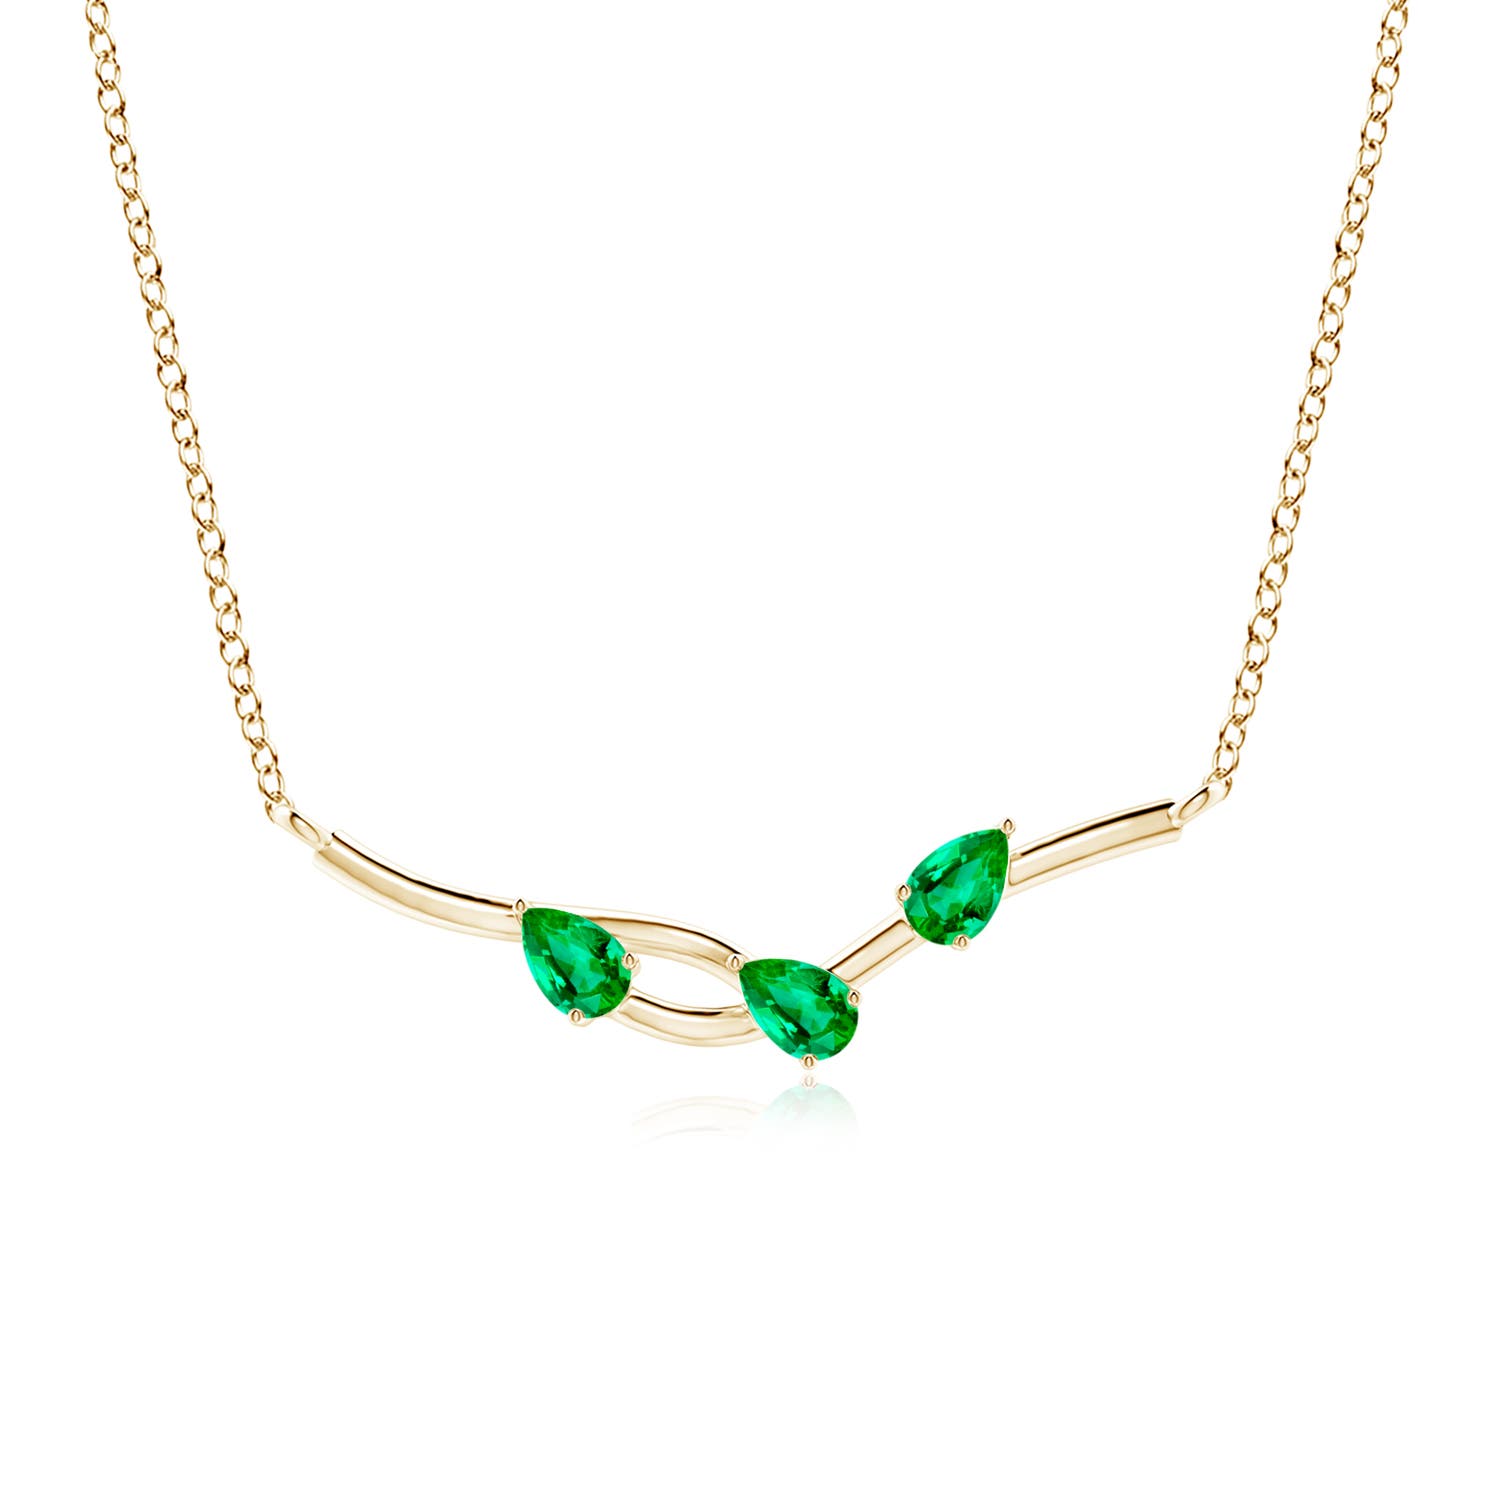 AAA - Emerald / 0.6 CT / 14 KT Yellow Gold